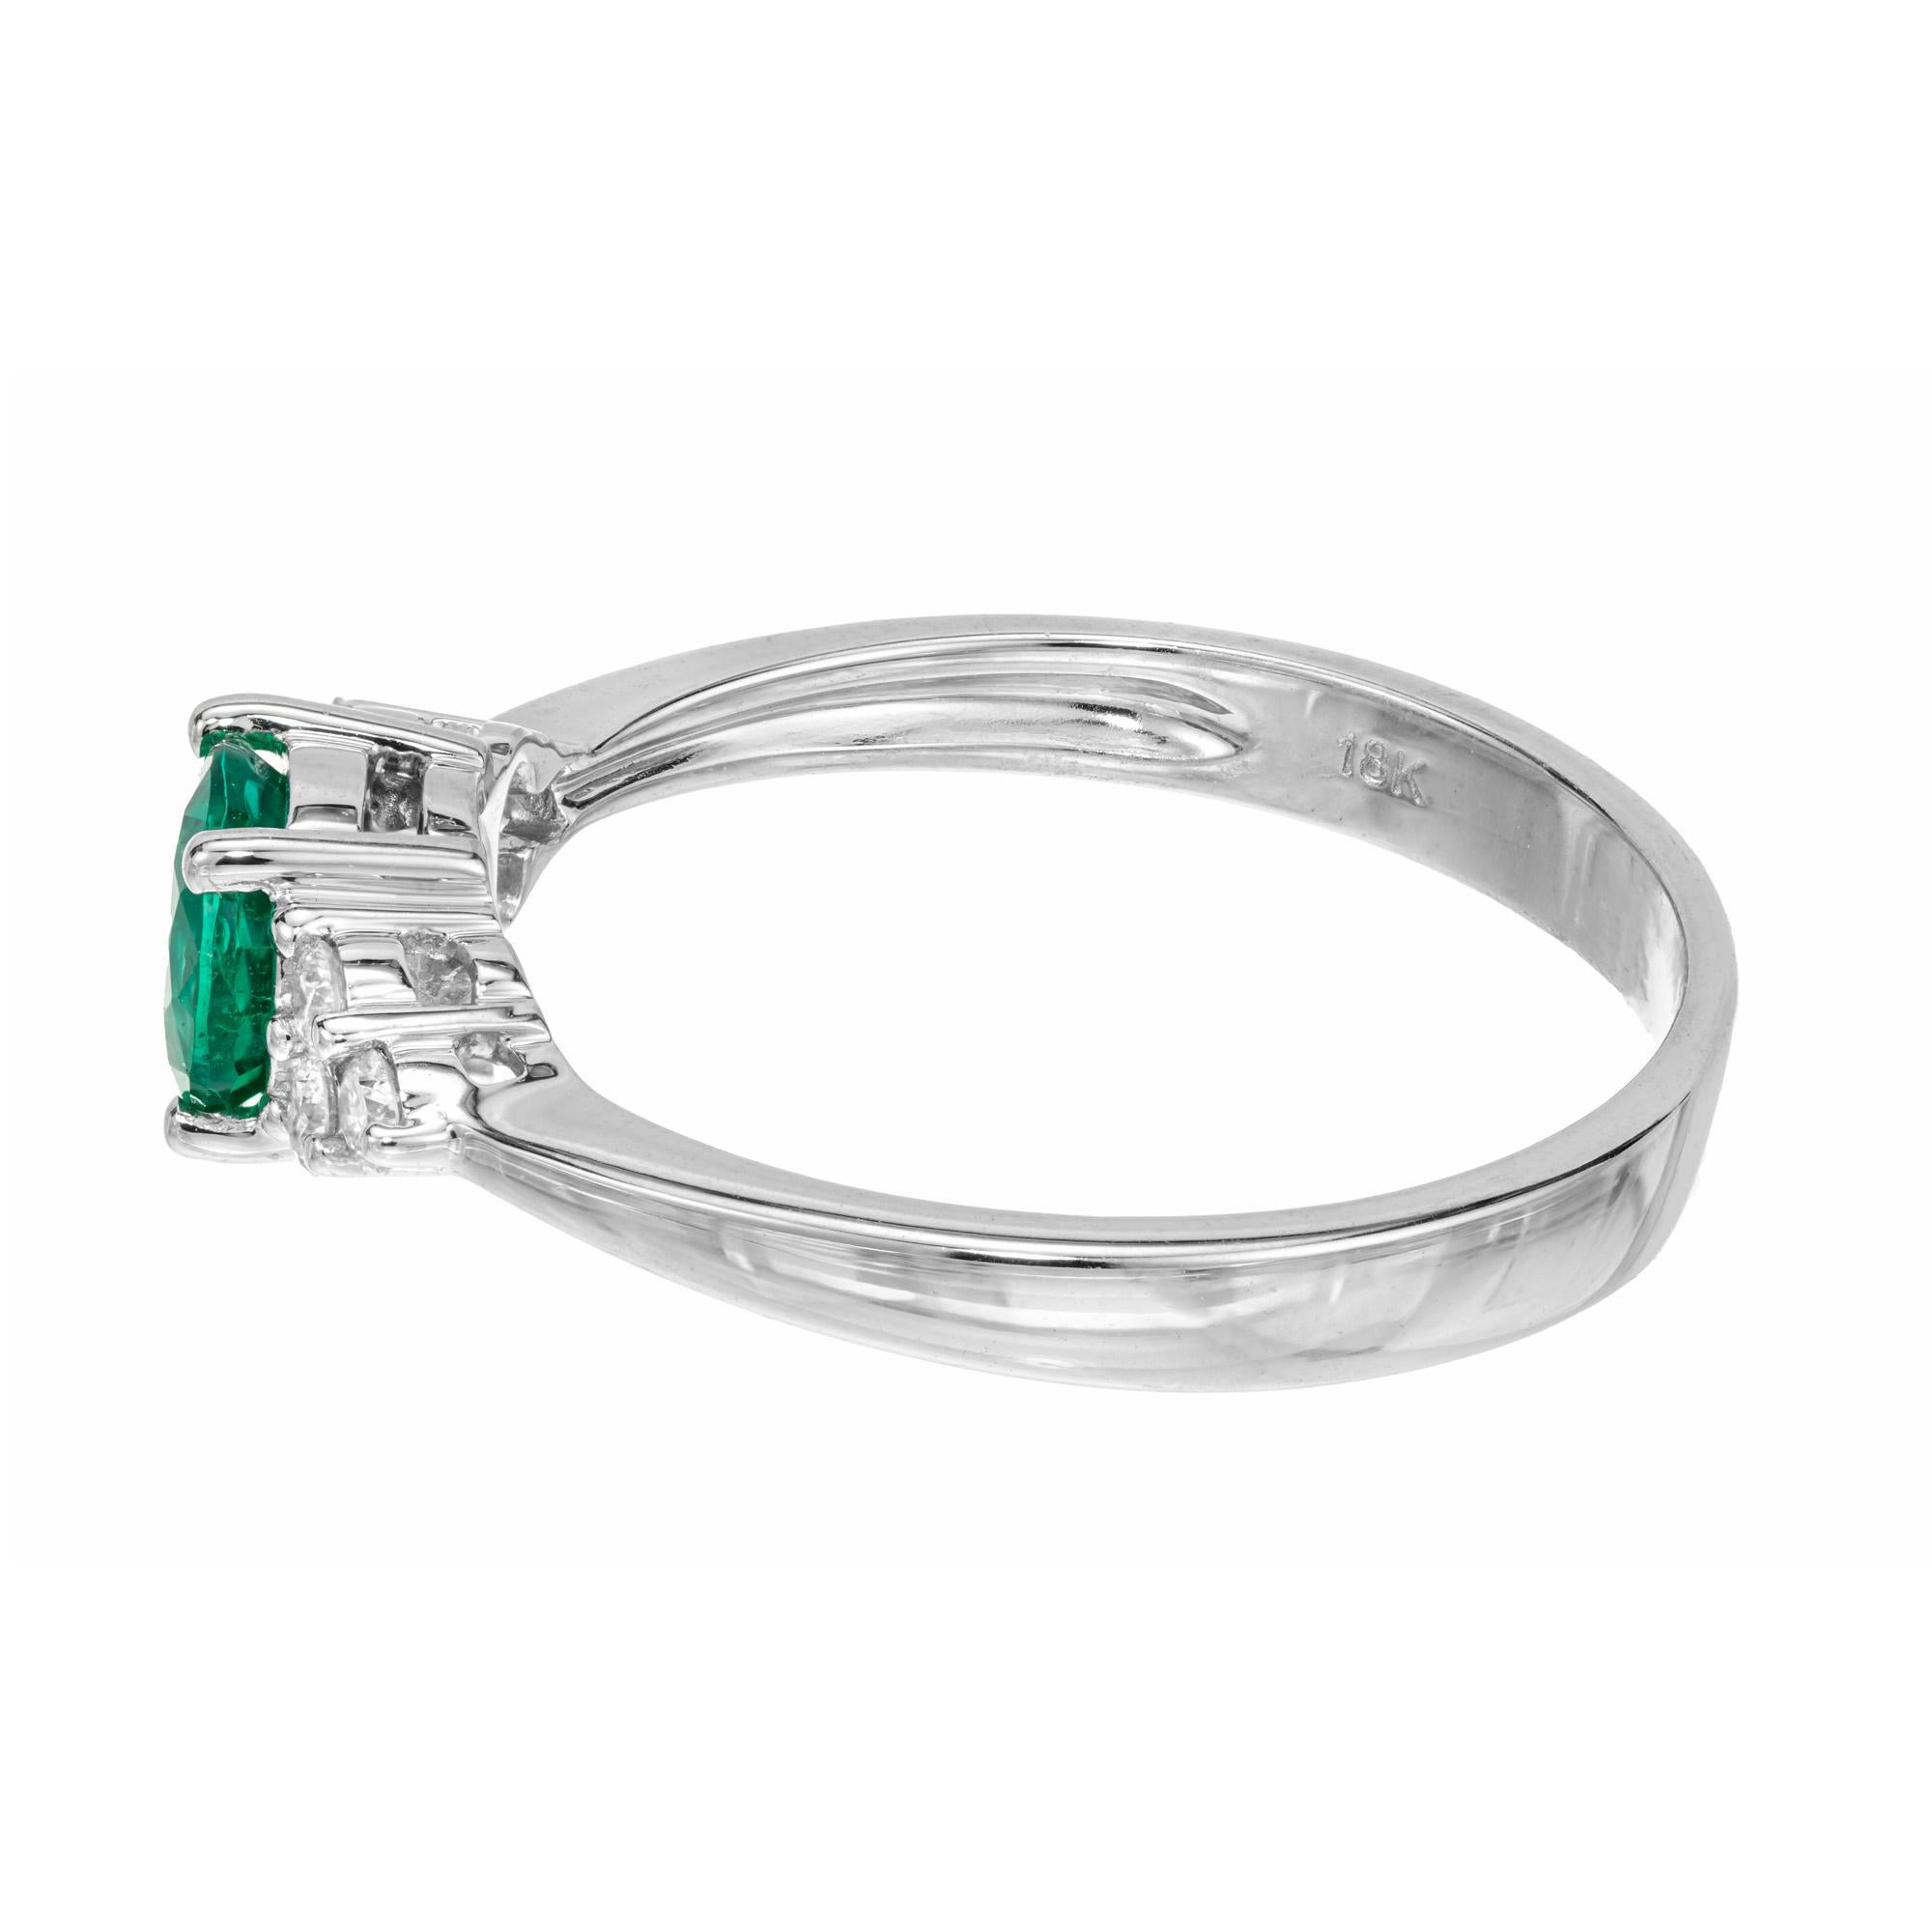 Emerald and diamond engagement ring. .68cts. round rich green emerald in a center stone set in a 18k white gold setting complemented with 3 round cut diamonds on each side of the stone. Designed and crafted in the Peter Suchy Workshop.

6 round